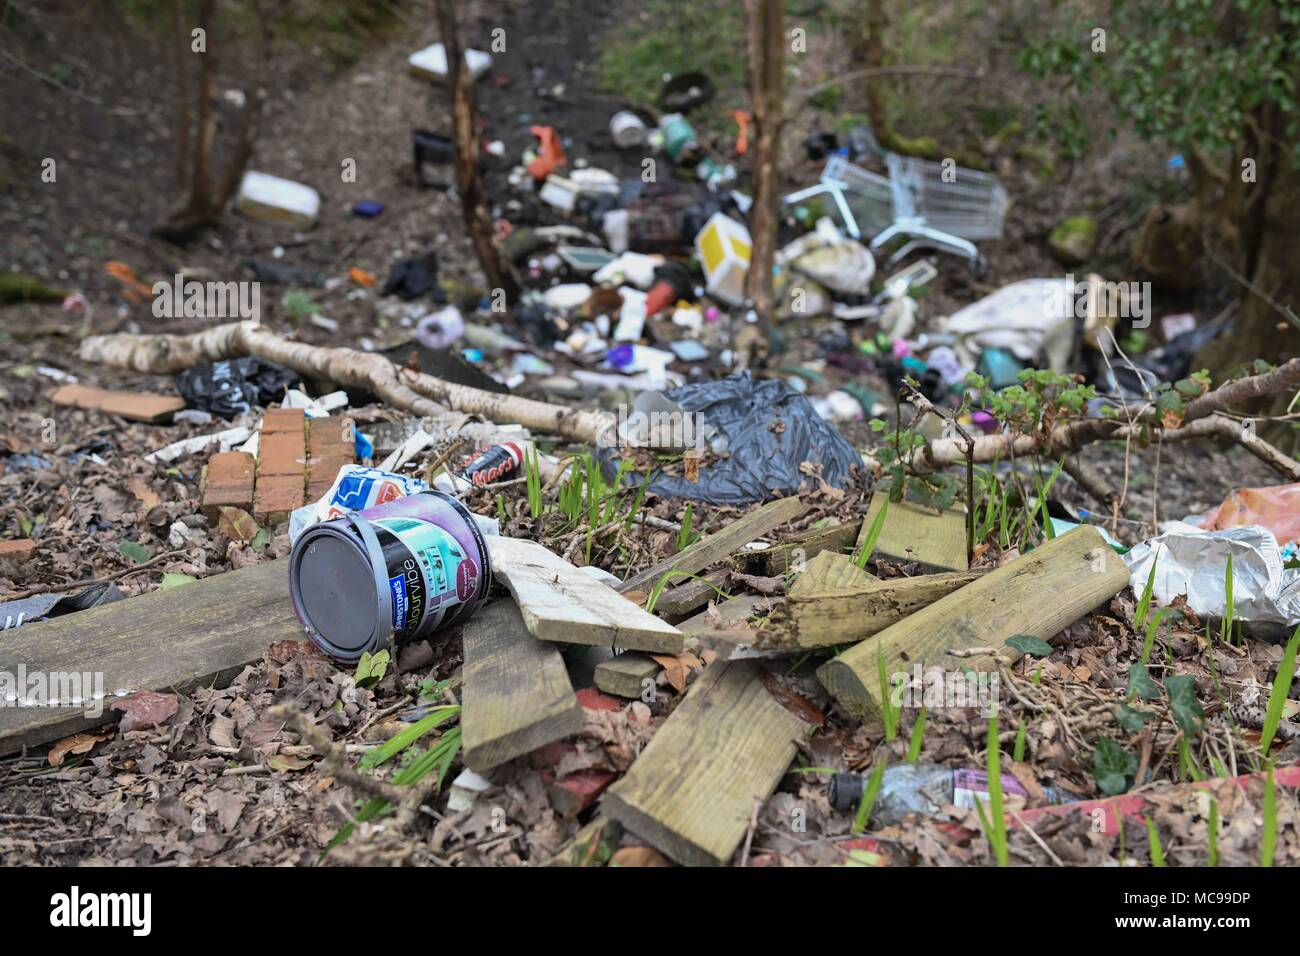 Piles of fly tipped rubbish including plastic, tyres, black bags, shoes are pictured in wasteland Stock Photo